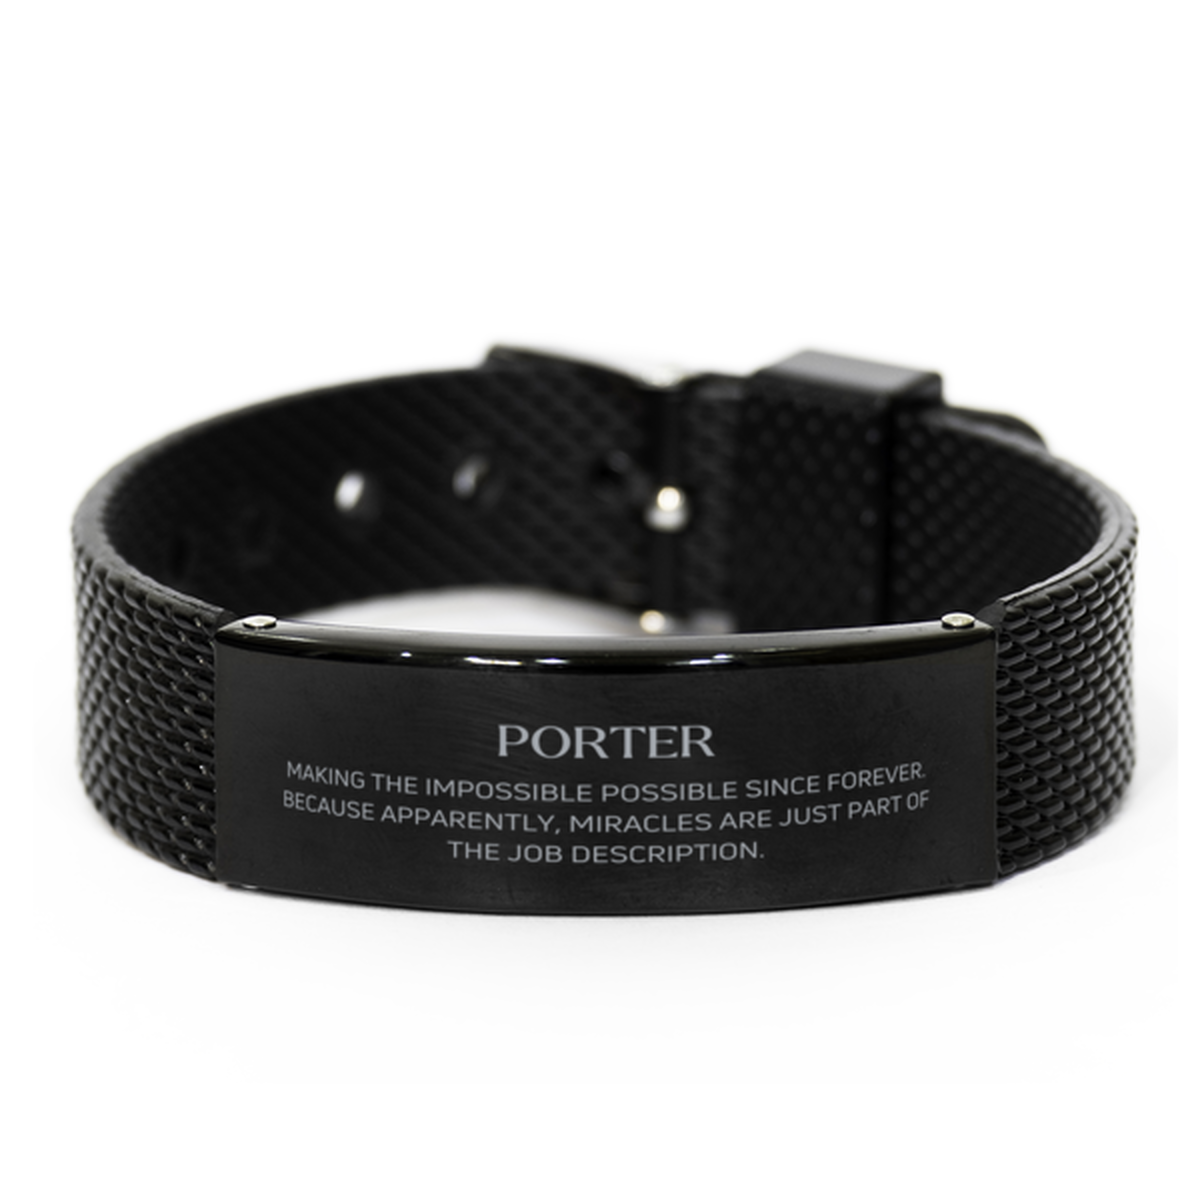 Funny Porter Gifts, Miracles are just part of the job description, Inspirational Birthday Black Shark Mesh Bracelet For Porter, Men, Women, Coworkers, Friends, Boss